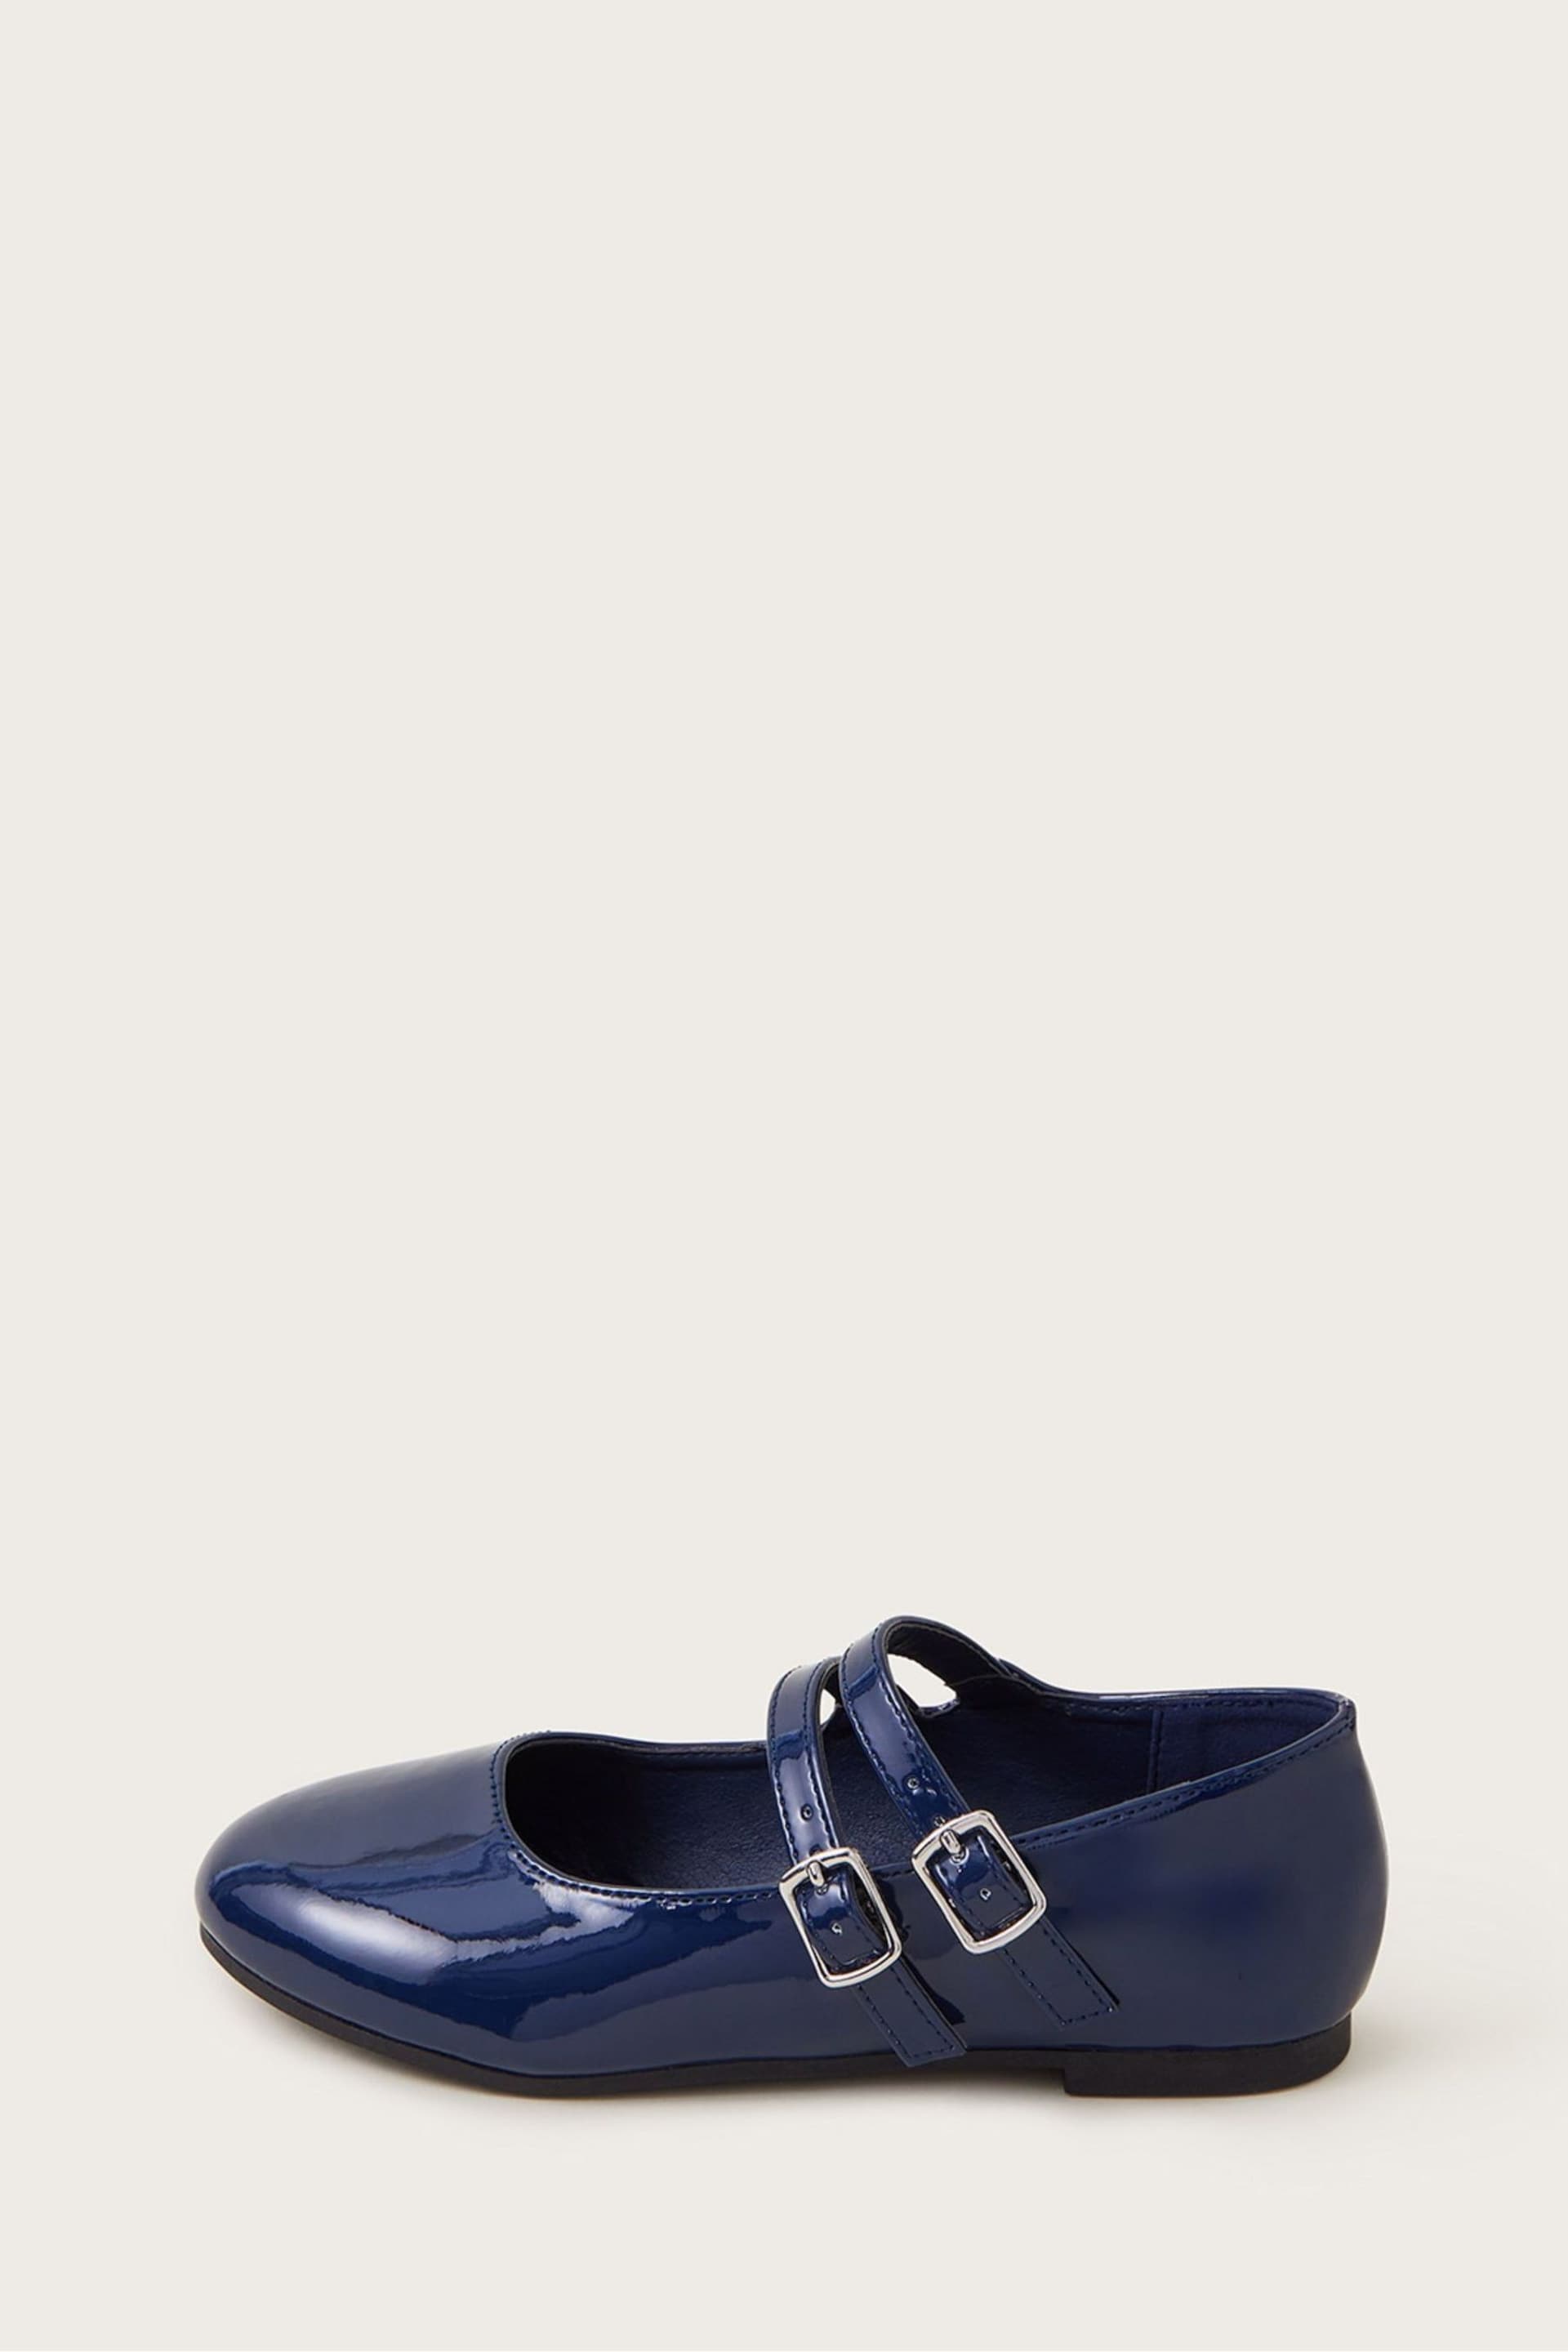 Monsoon Blue Two Strap Patent Ballet Flats - Image 1 of 3